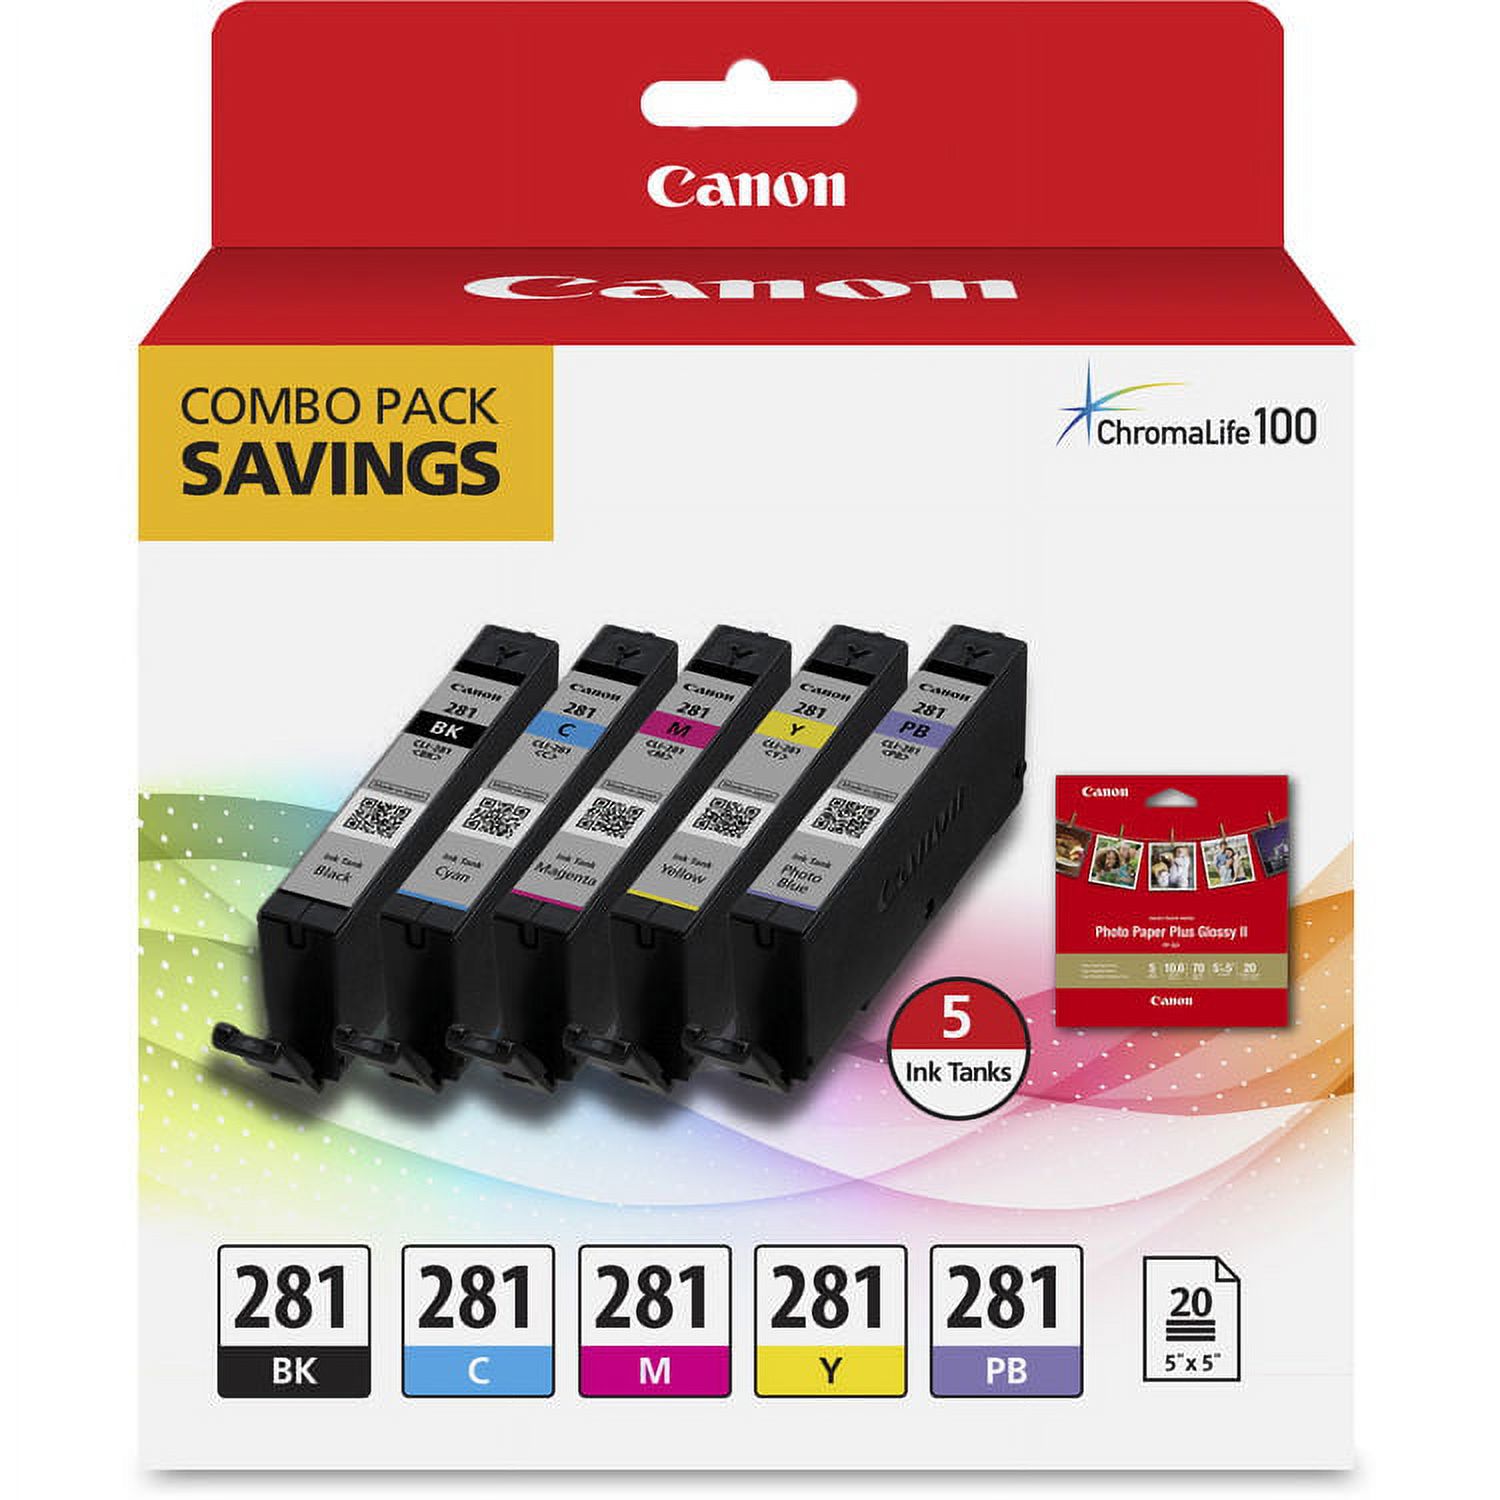 Genuine Canon CLI-281 5-Color Ink Tank Combo Pack with 5 x 5 Photo Paper (2091C006) + Canon PGI-280 Pigment Black Ink Tank (2075C001) - image 3 of 3